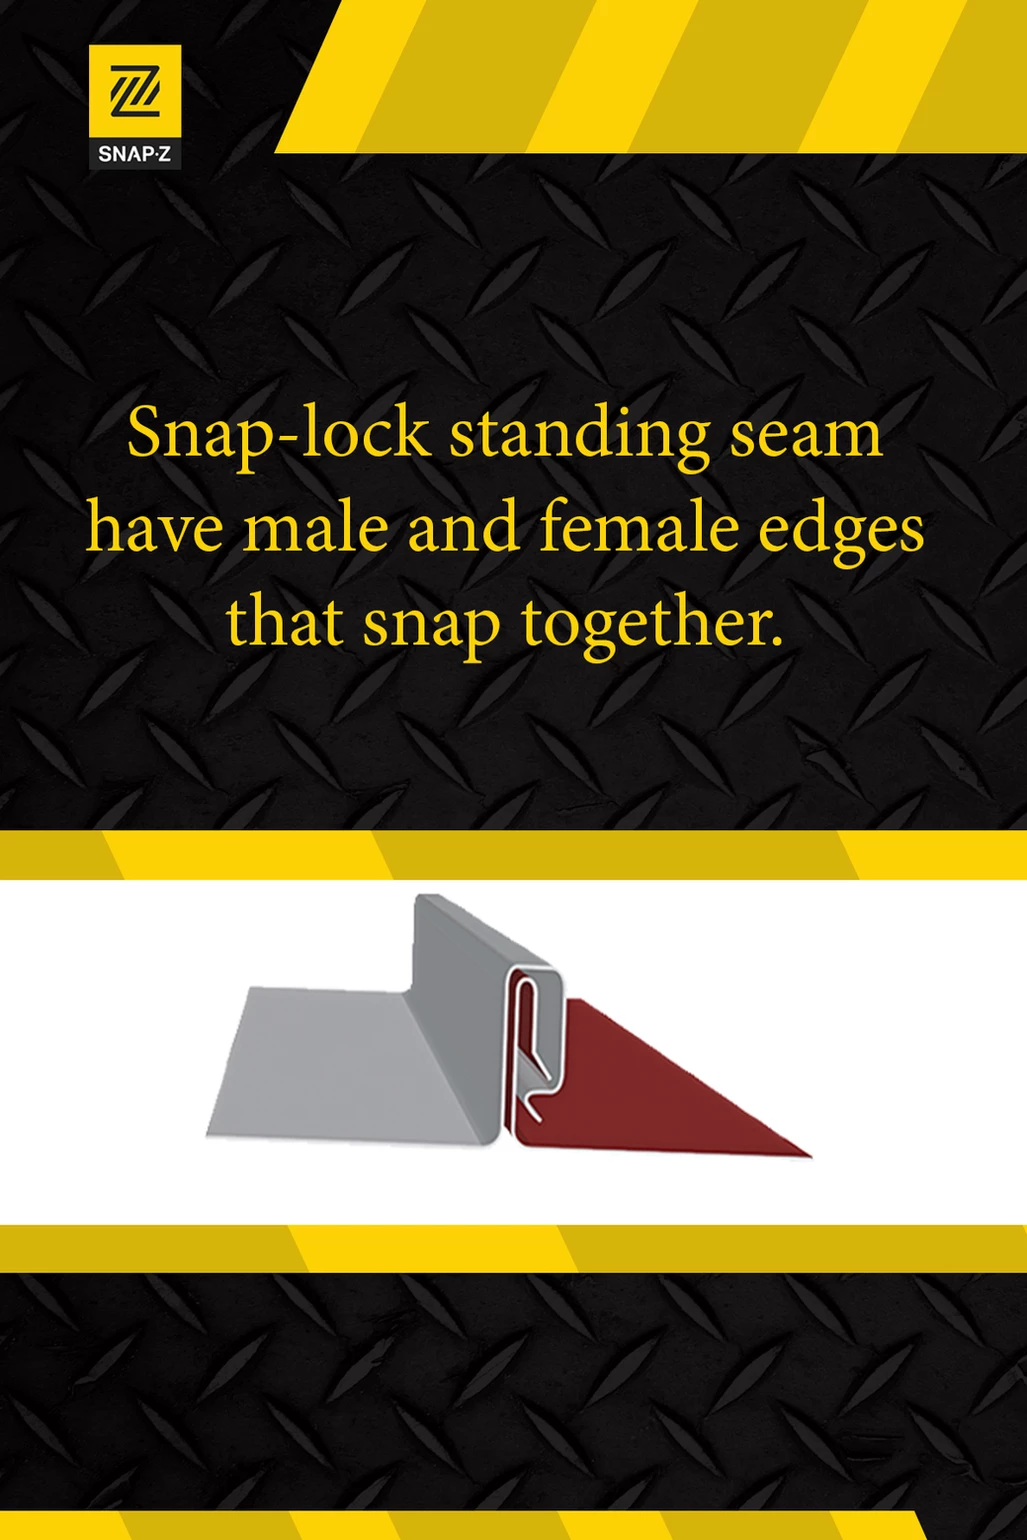 snao lock standing seam have male and female edges that snap together